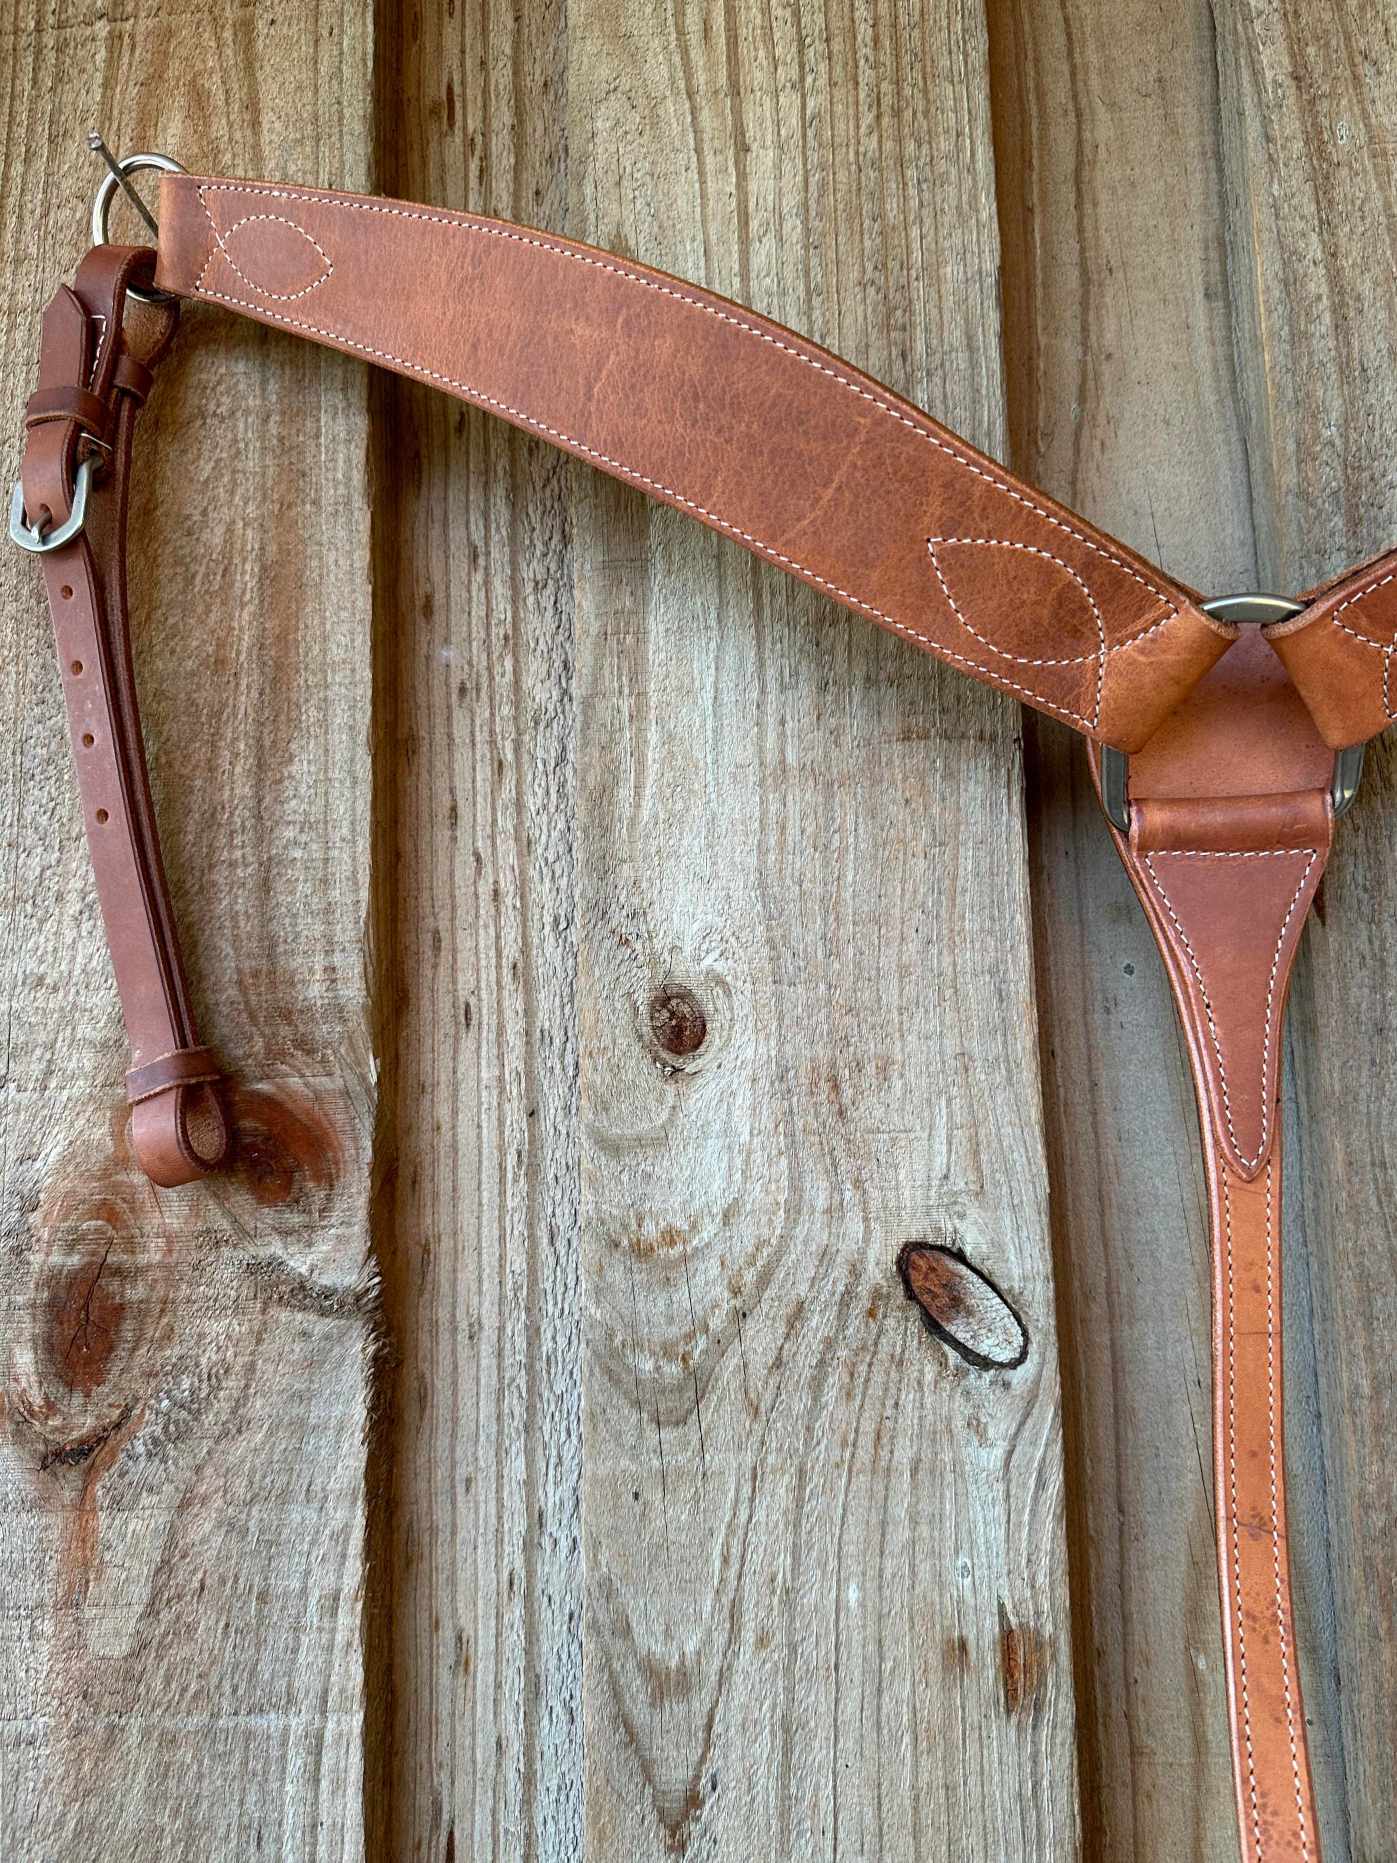 Breastcollar - Harness Oiled leather Ranch breastplate